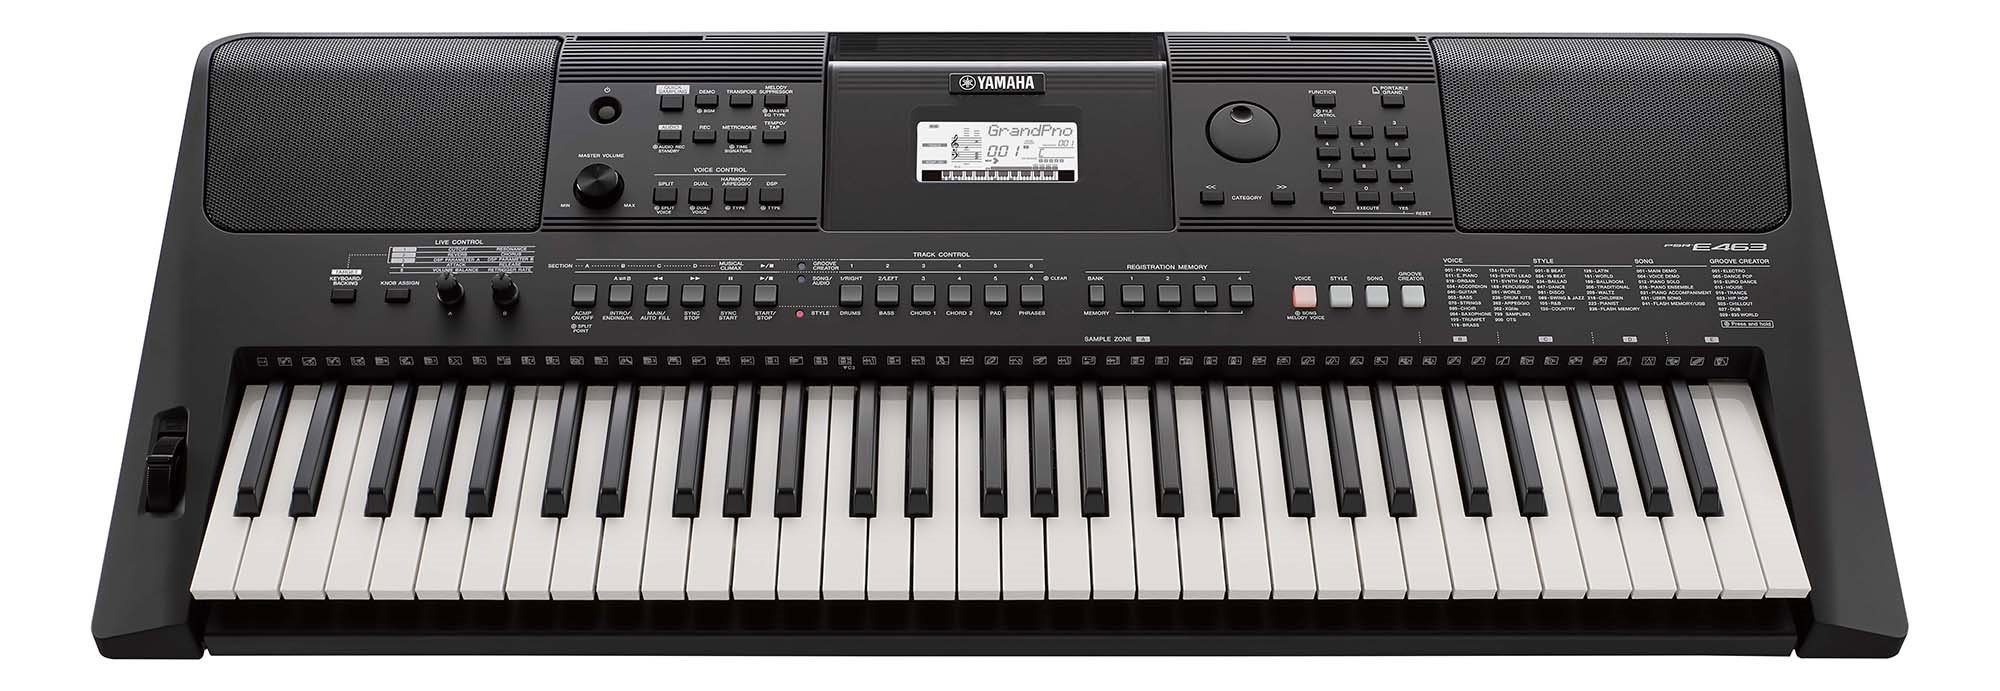 PSR-E463 - Overview - Portable Keyboards - Keyboard Instruments